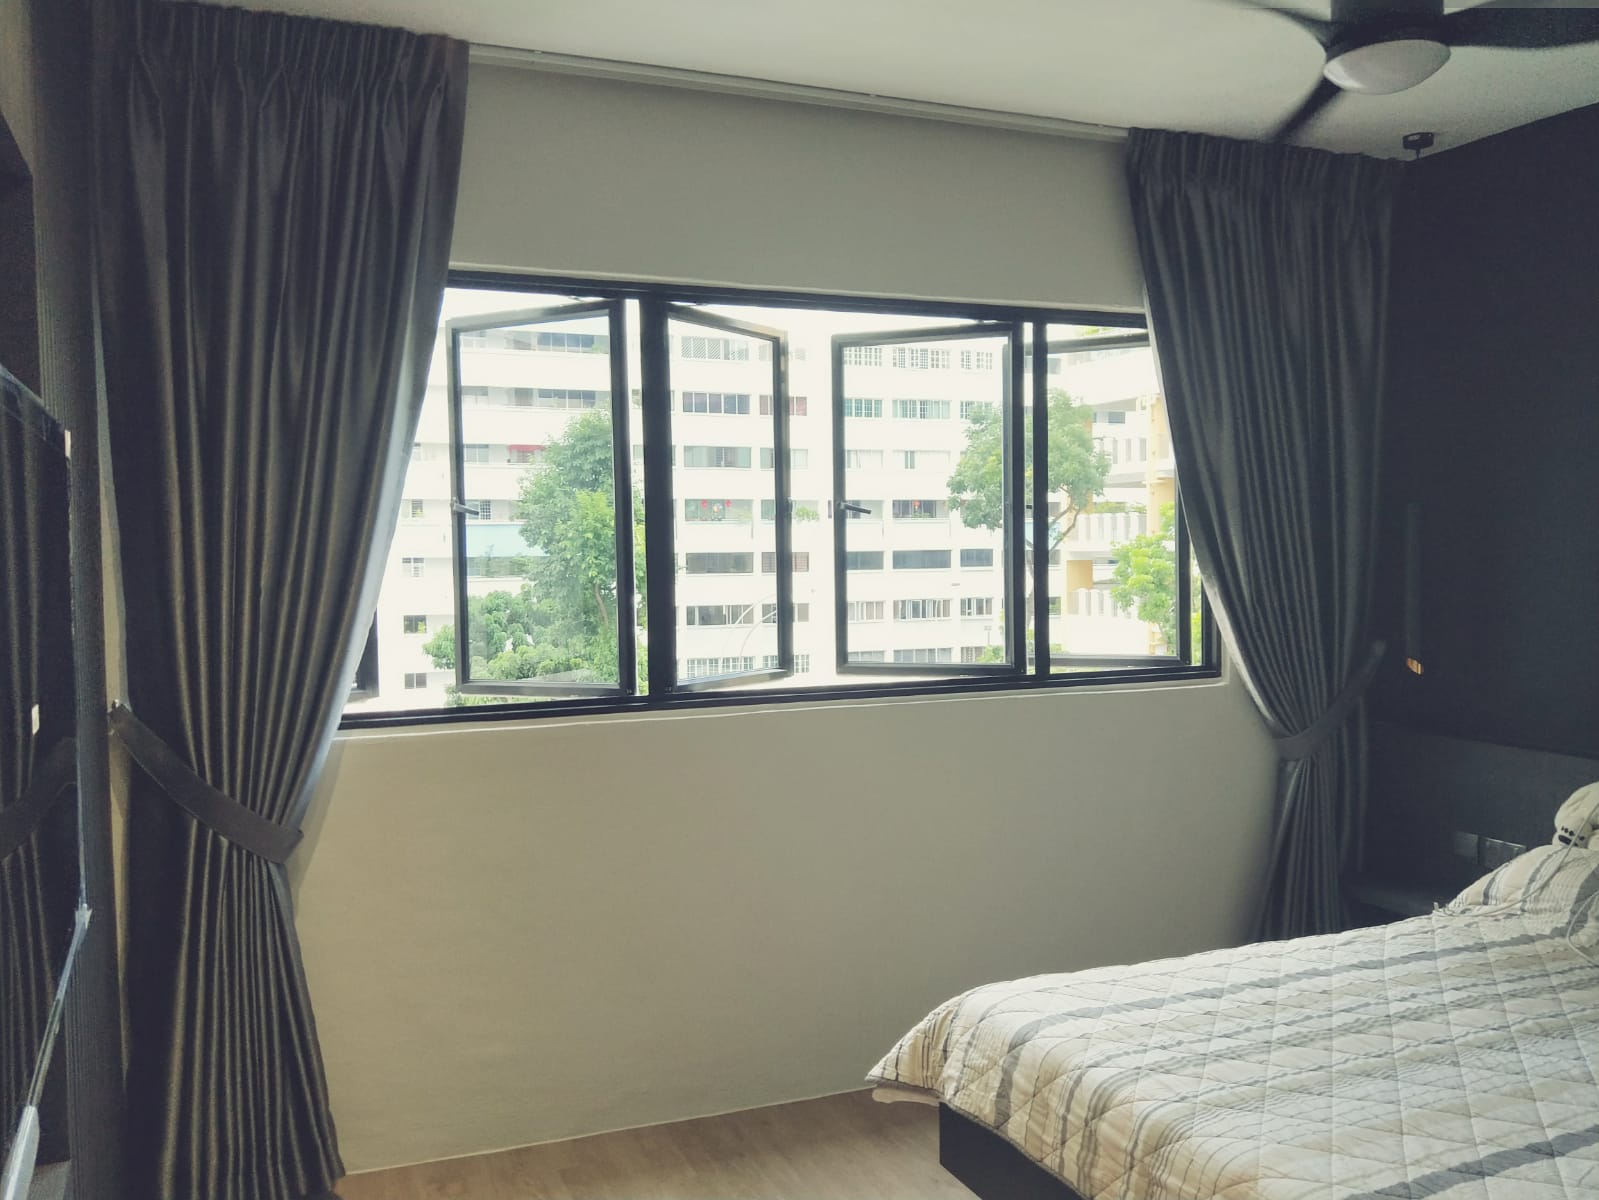 Blackout Curtains Singapore HDB Home Bedroom